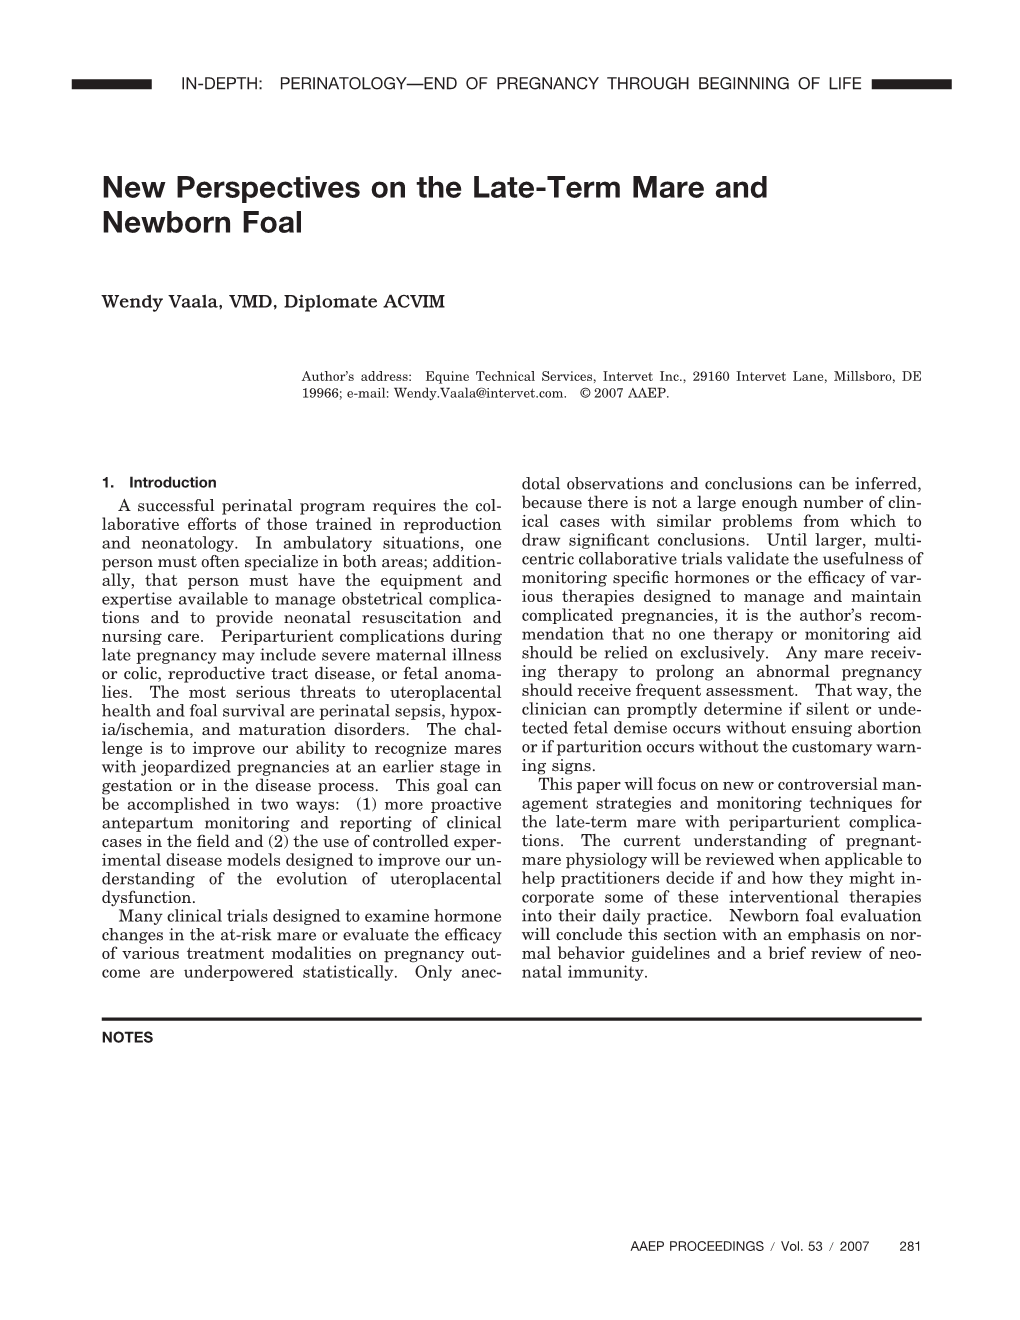 New Perspectives on the Late-Term Mare and Newborn Foal